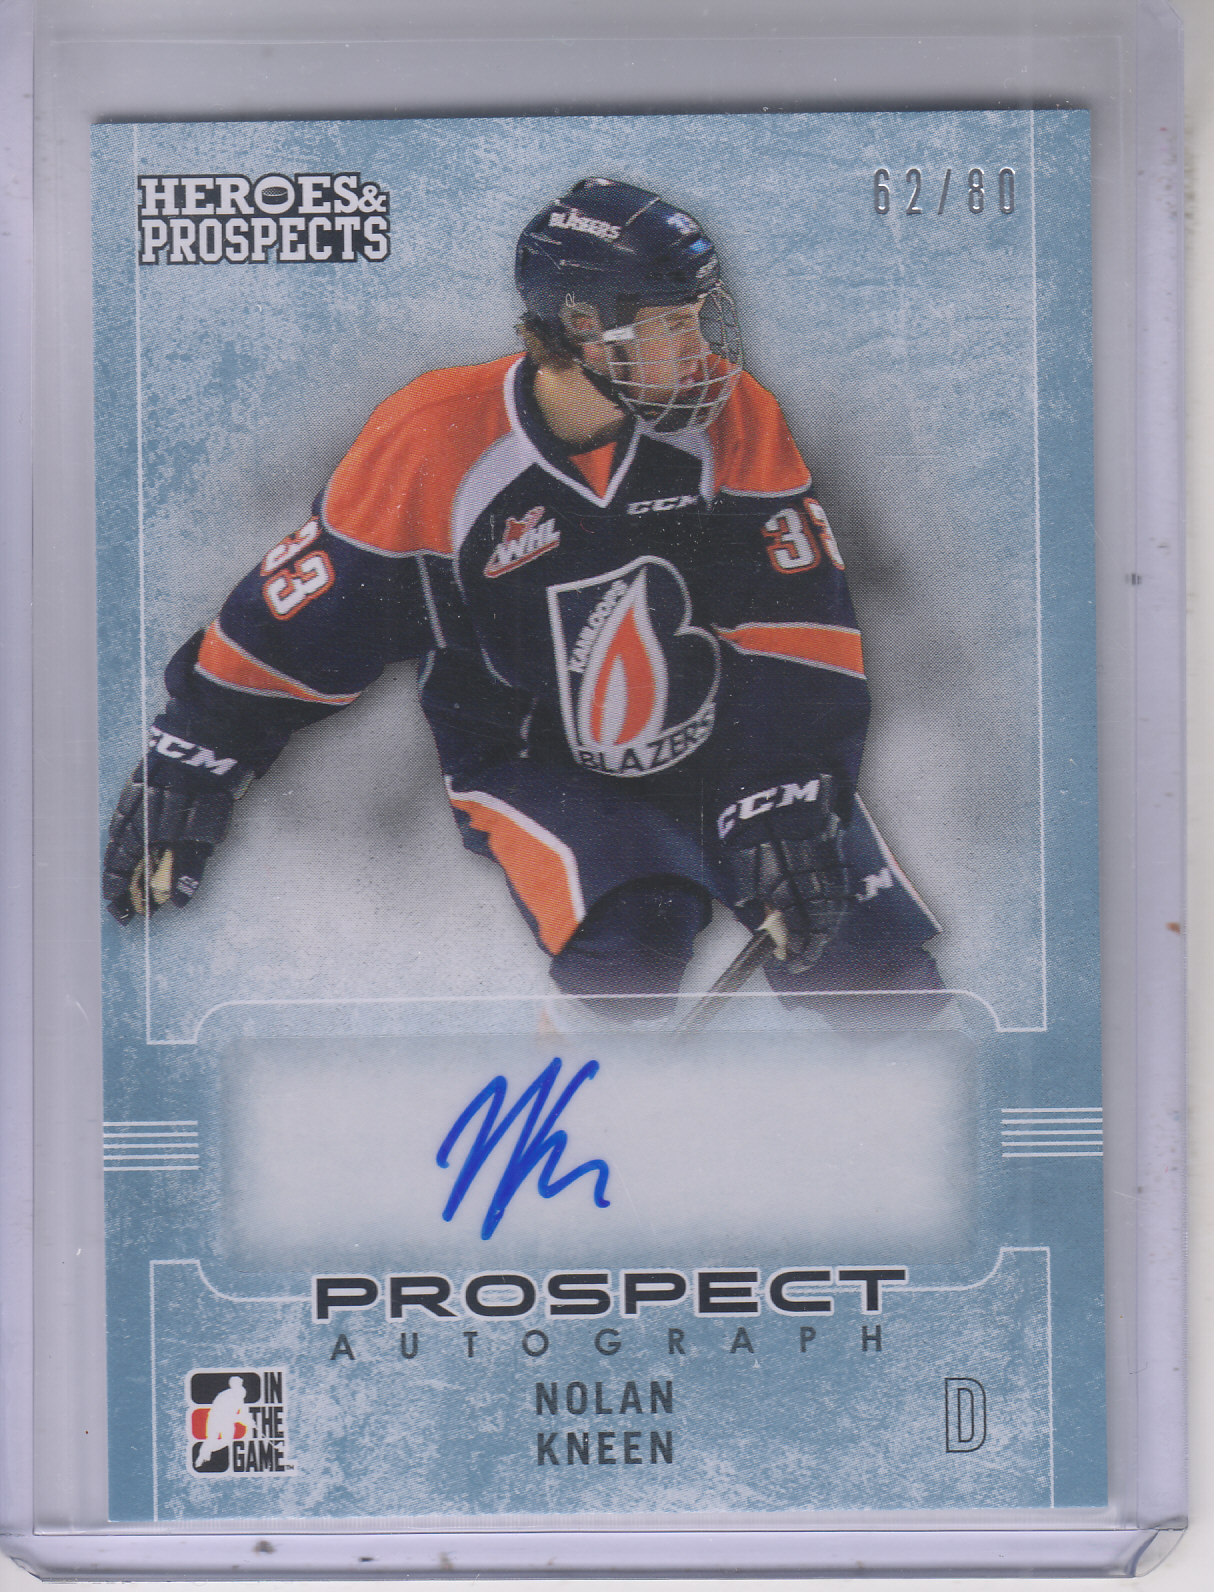 2014-15 ITG Heroes and Prospects Prospect Autographs #69 Nolan Kneen/80